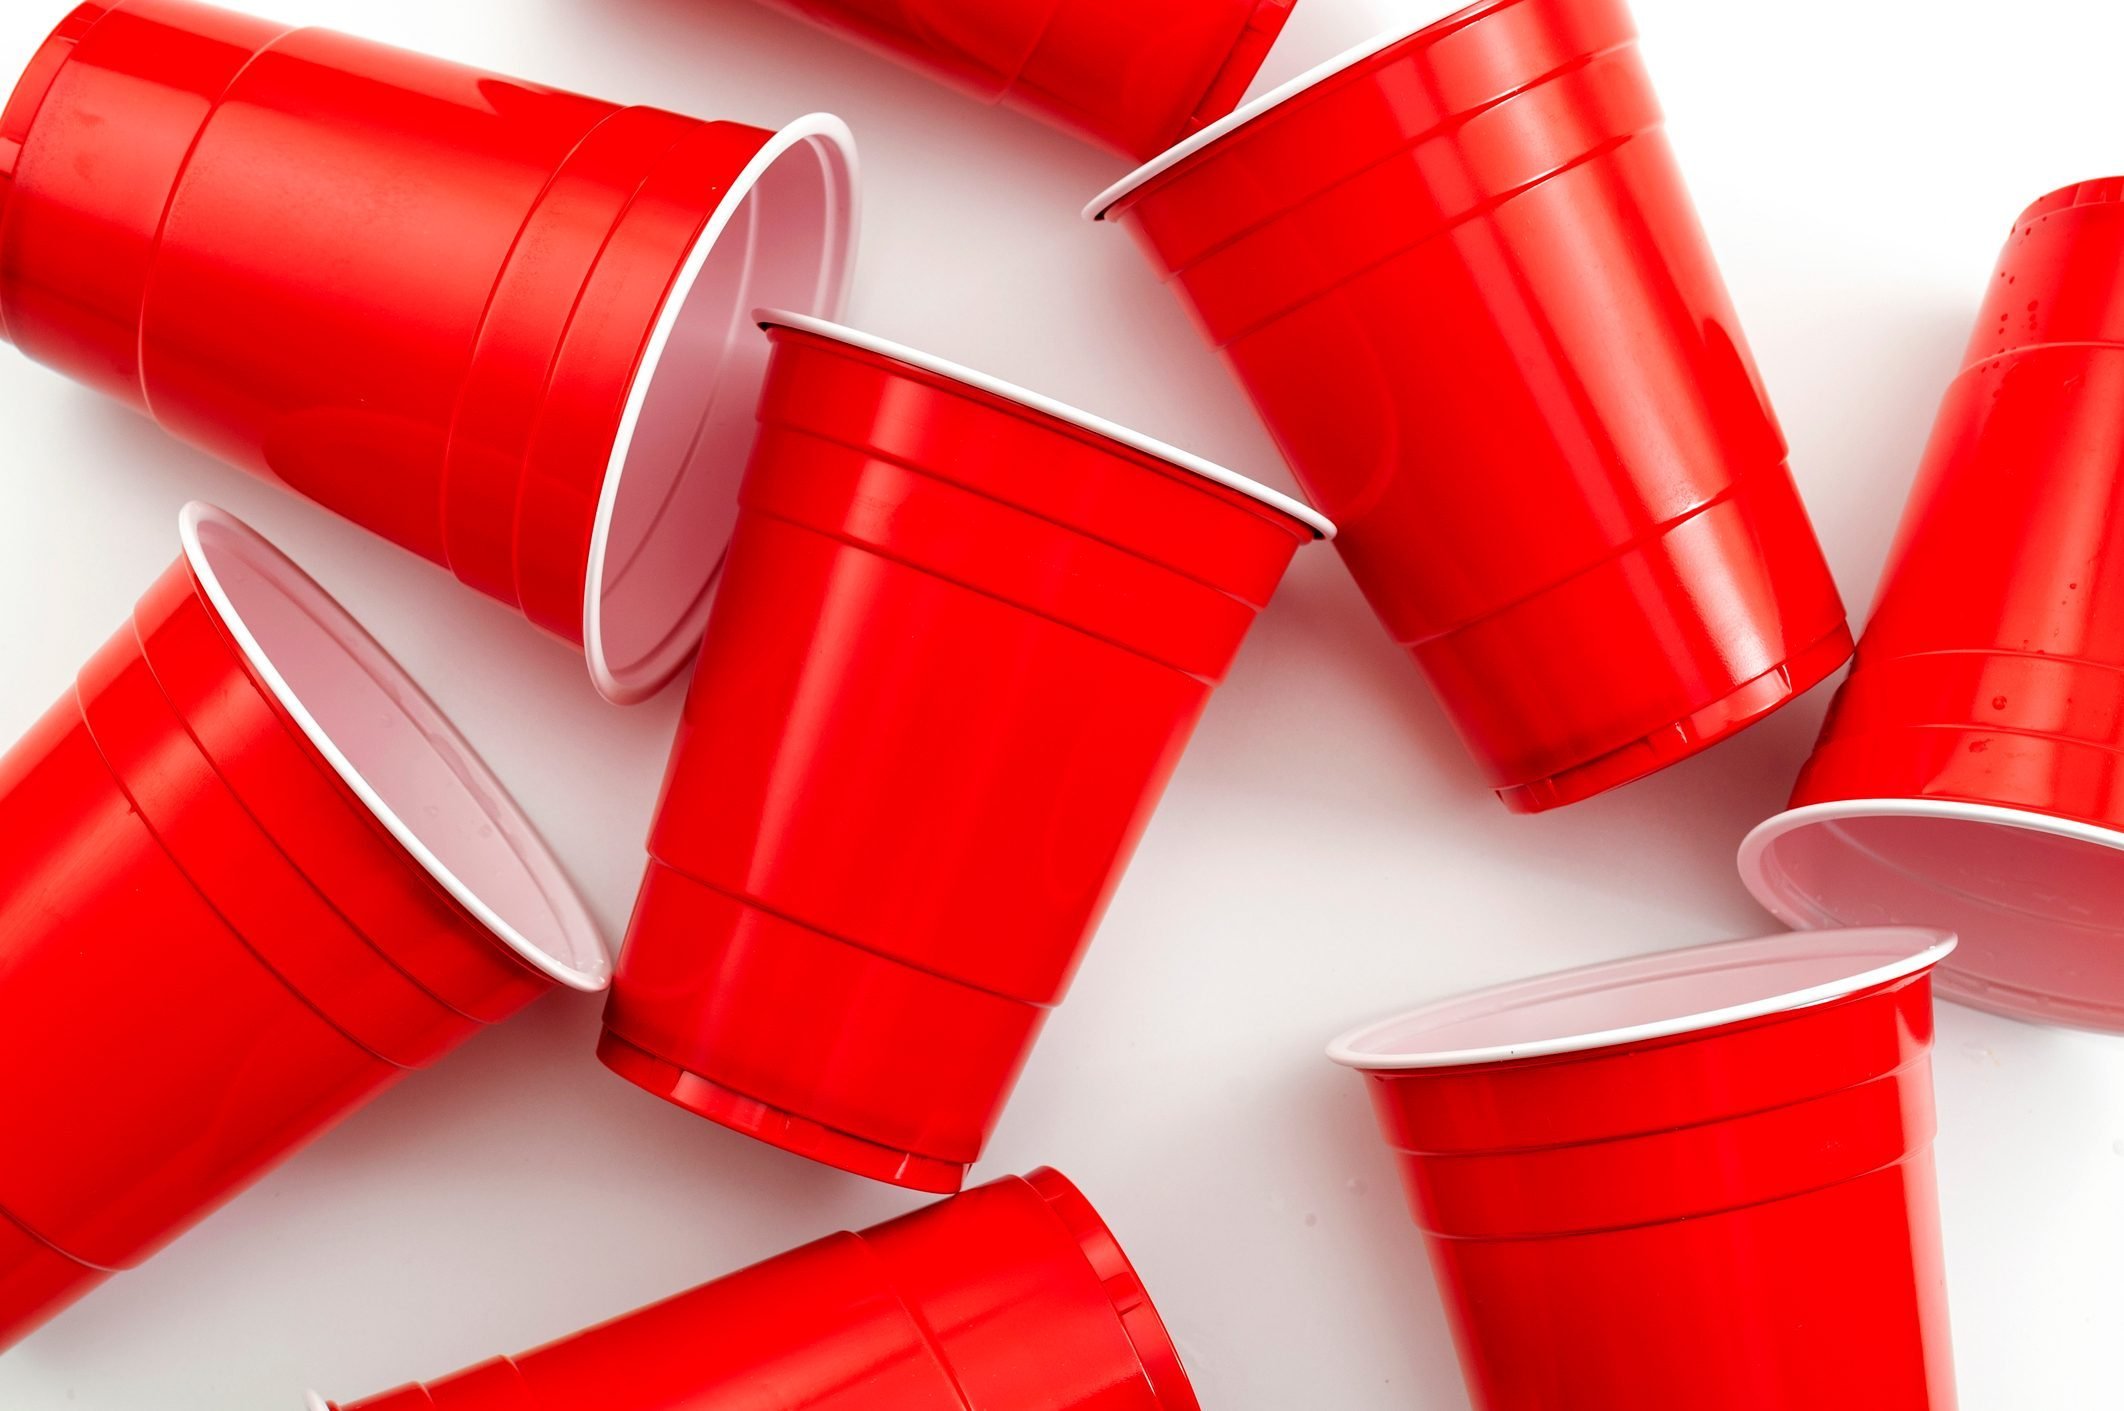 The red party cup gets a beer pong update. 